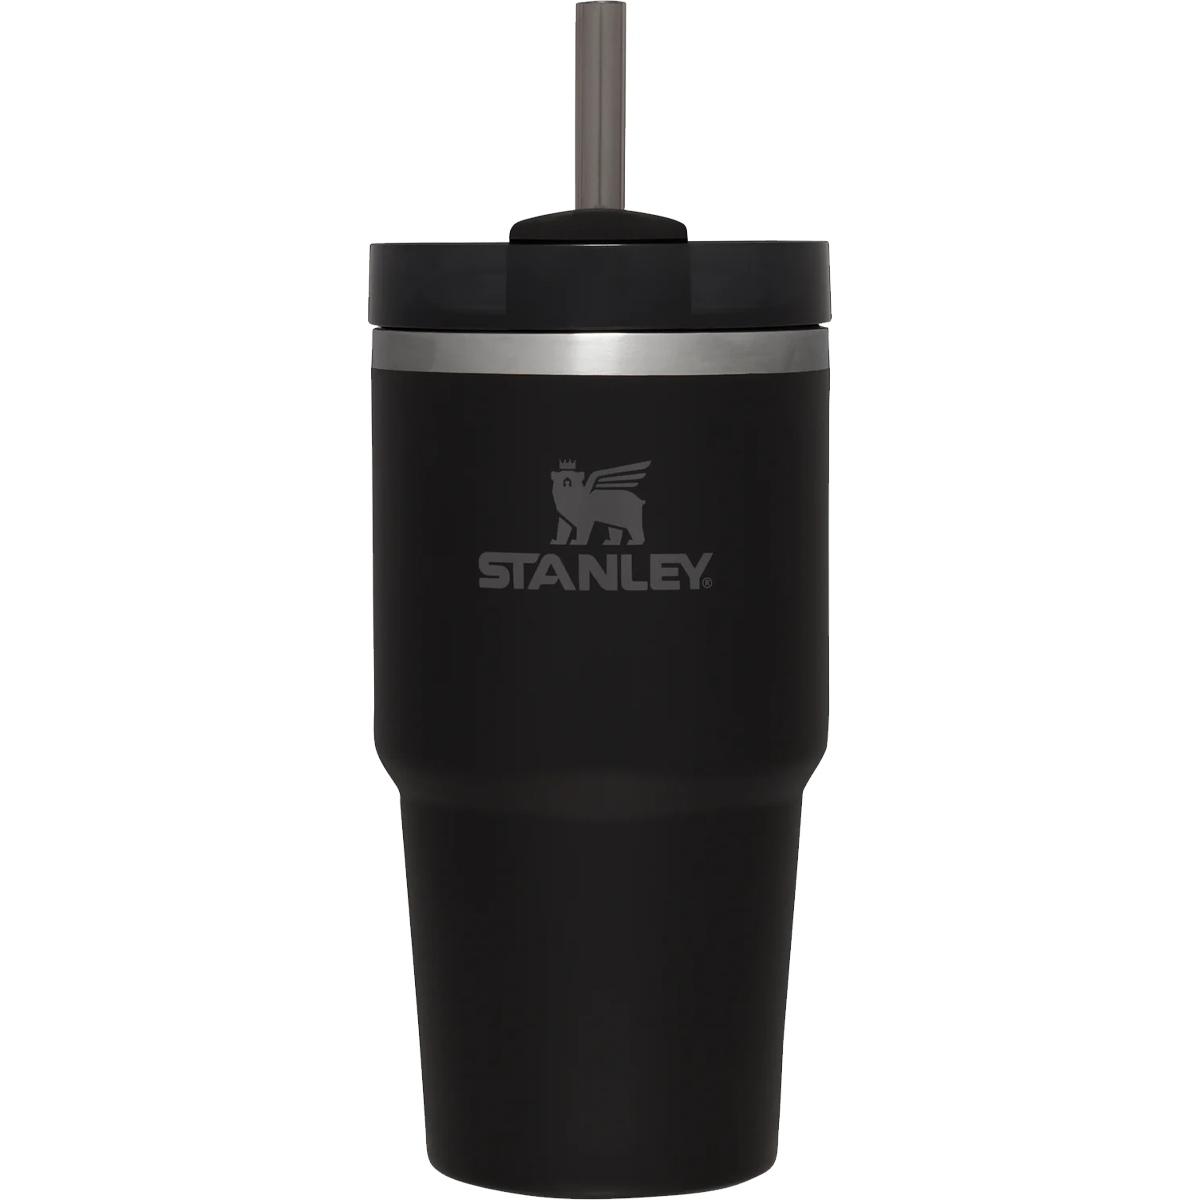 You Can Get A Stanley Tumbler For As Low as $30. Today Only